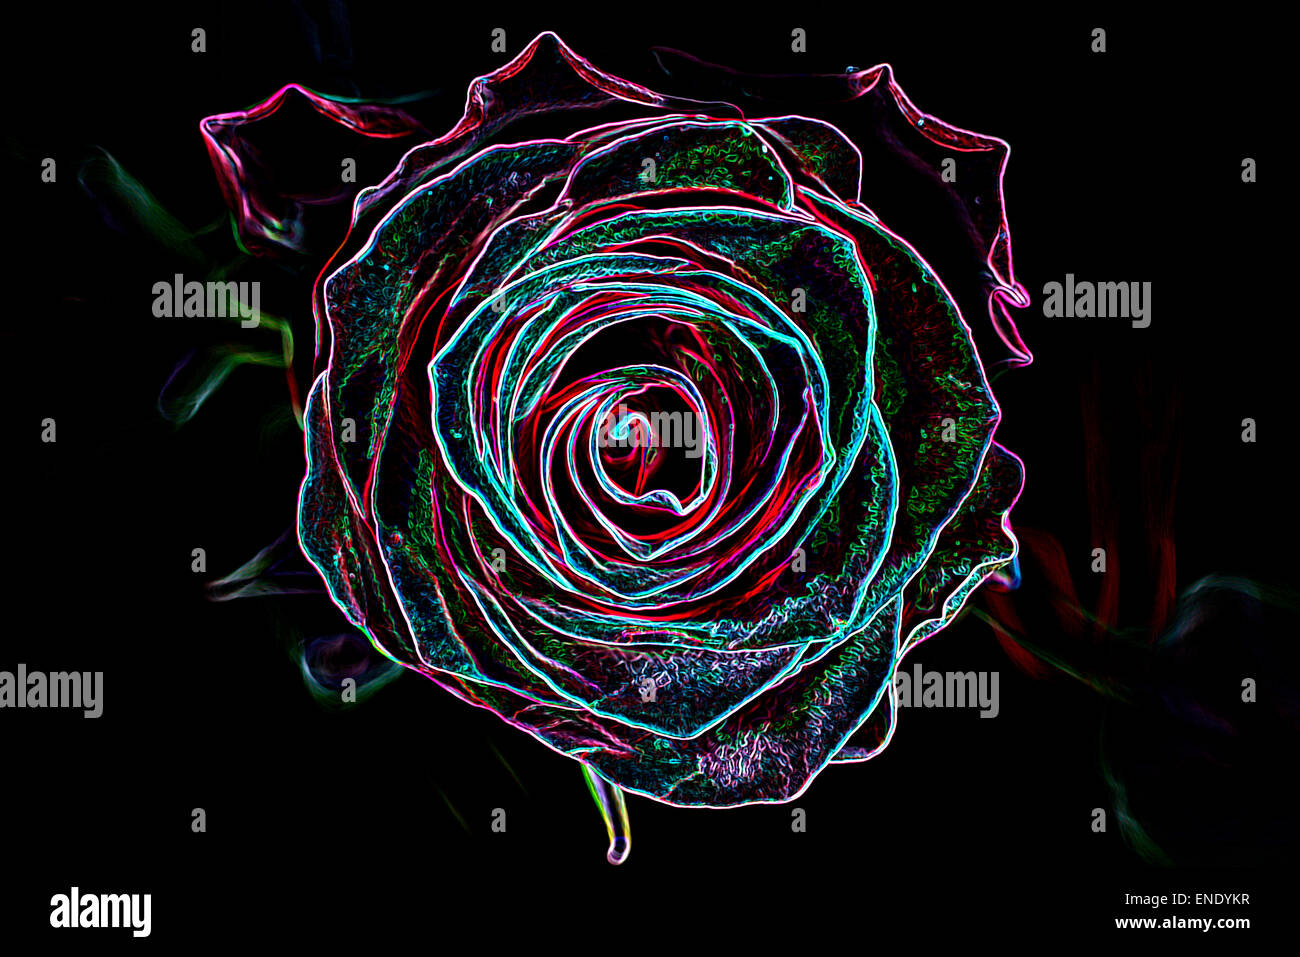 Abstract background made of rose flower, glowing neon style. Stock Photo